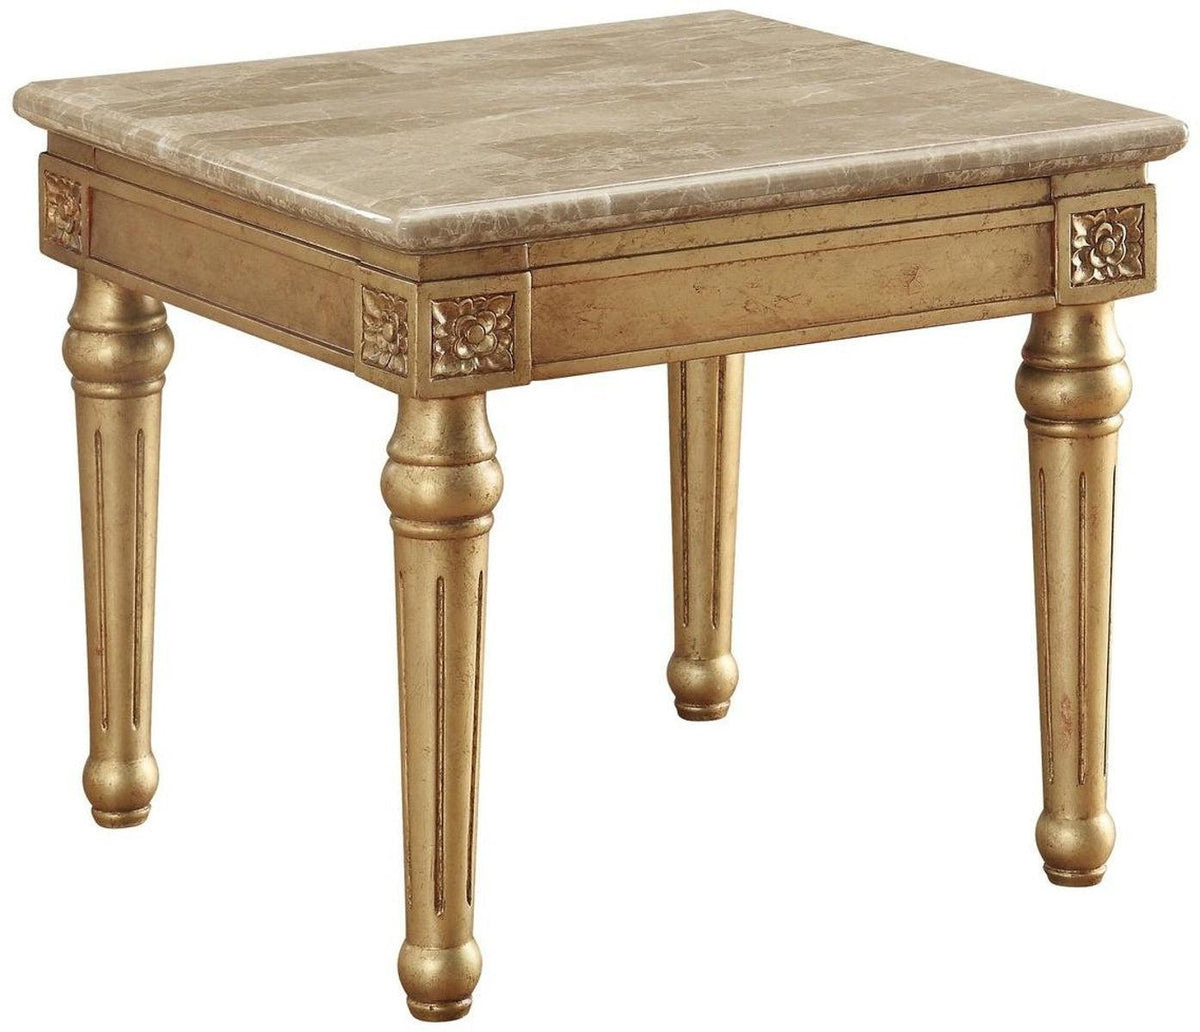 Acme Furniture Daesha End Table in Marble/Antique Gold 81717  Half Price Furniture